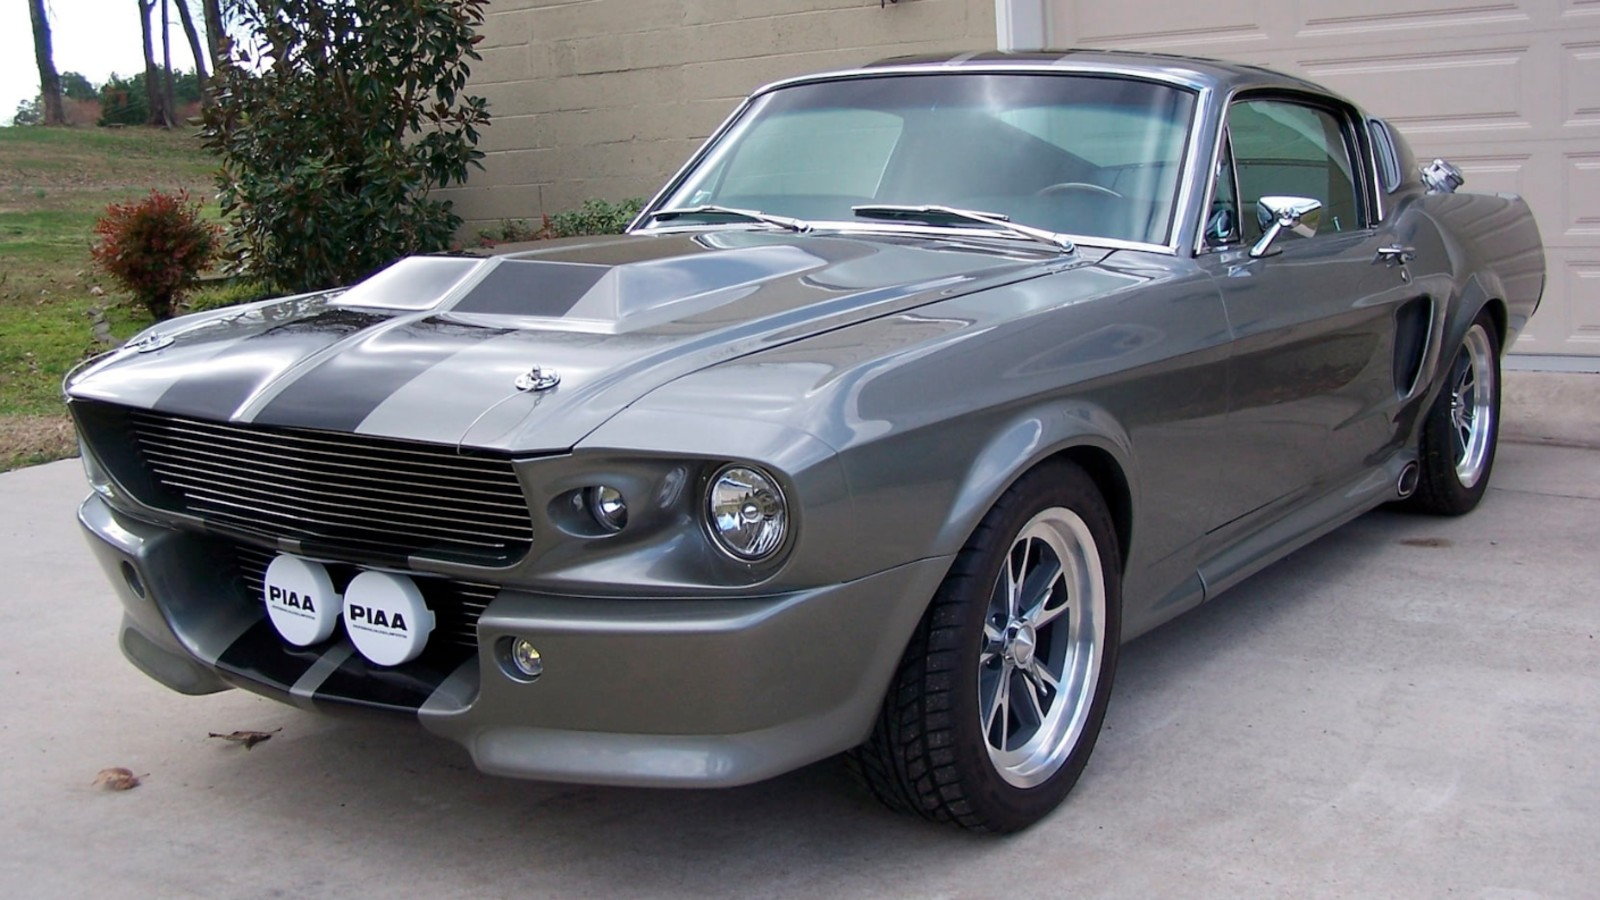 It Took Three Years to Build This 1967 Mustang Resto-Mod | Themustangsource